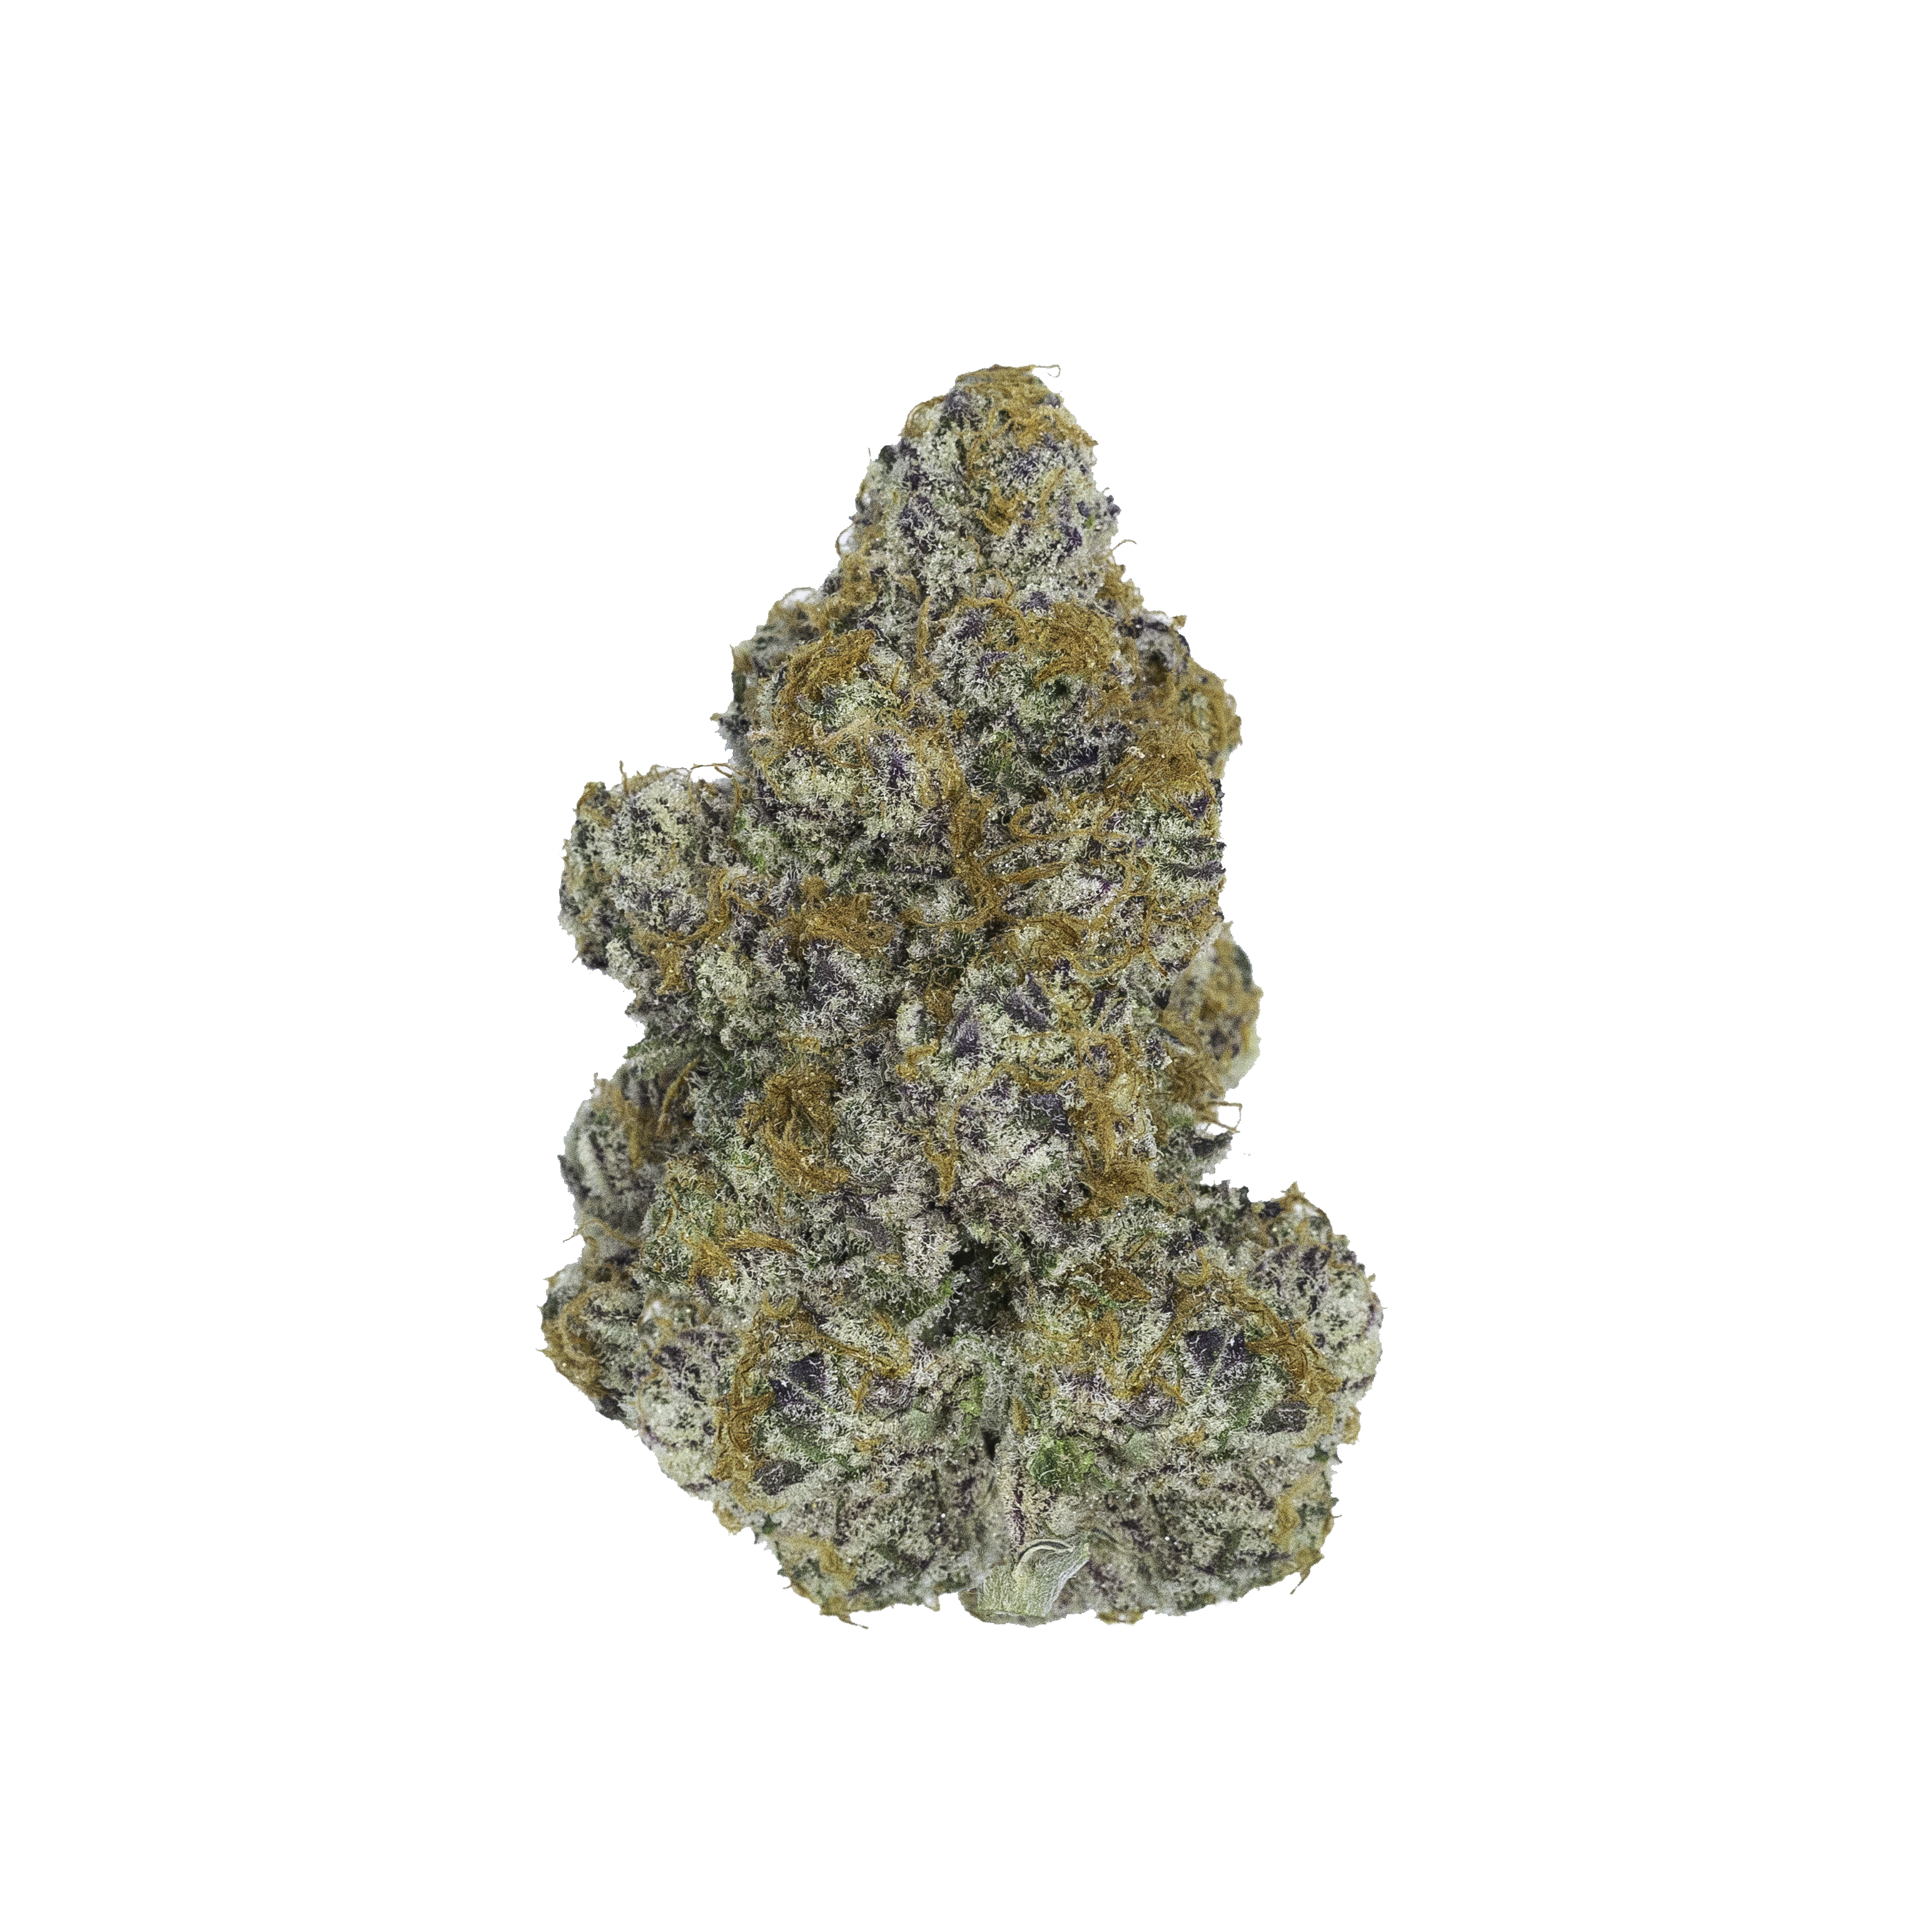 A cannabis flower nug from the Gelato strain sits up straight against a black background.